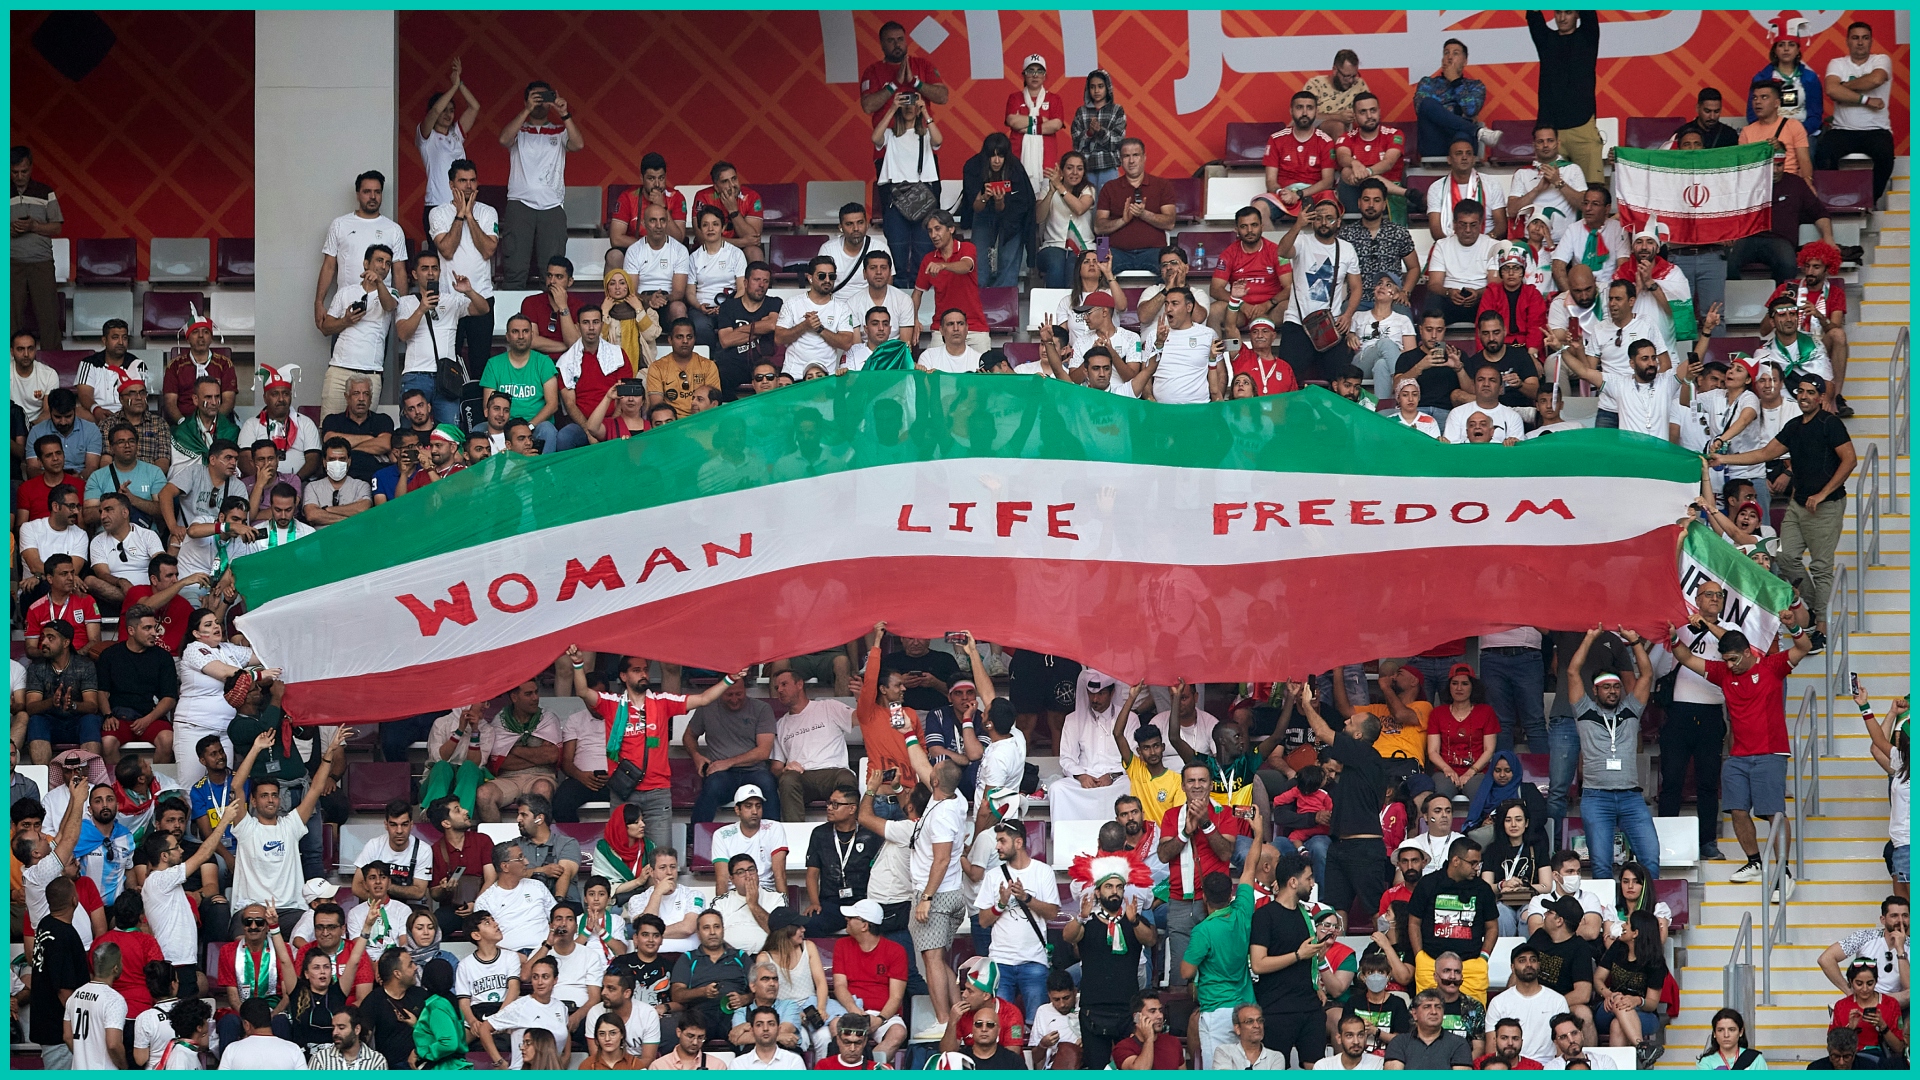 Iranian fans hold up signs "Woman Life Freedom" during the FIFA World Cup Qatar 2022